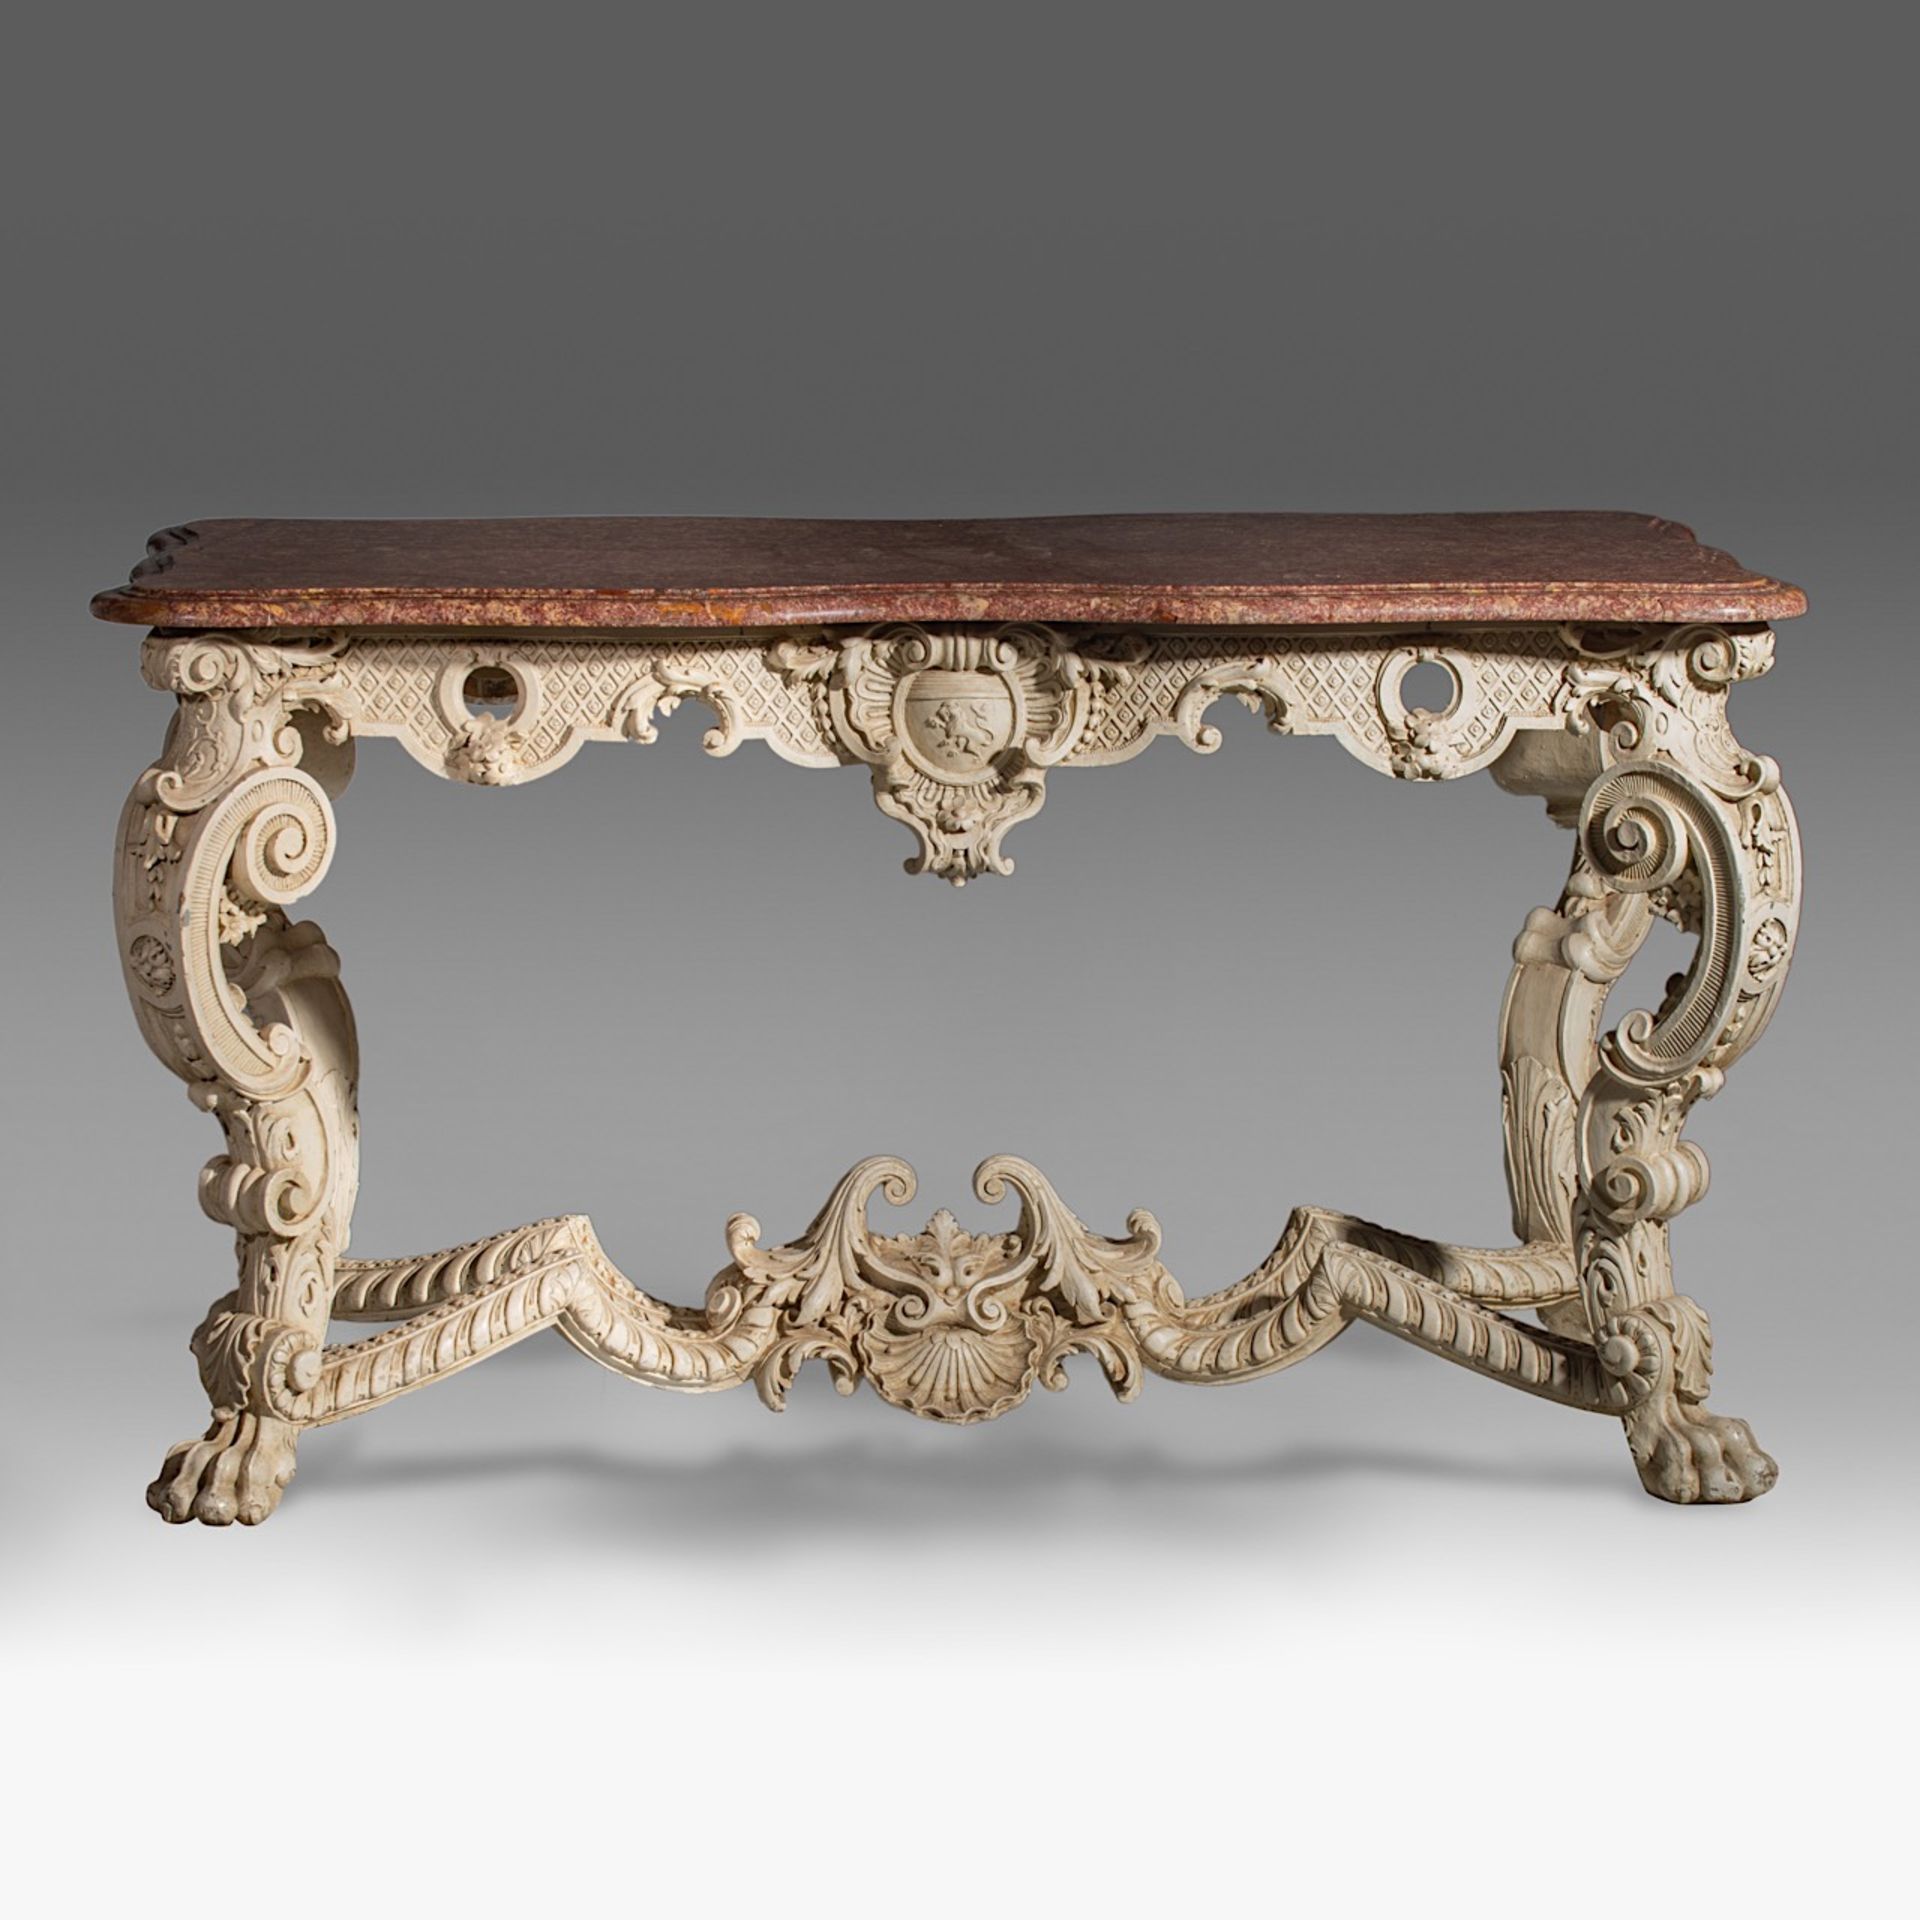 An imposing Louis XIV-style 'console de milieu' with a brocatelle marble, 19thC, H 81,5 - W 147 - D - Image 4 of 11